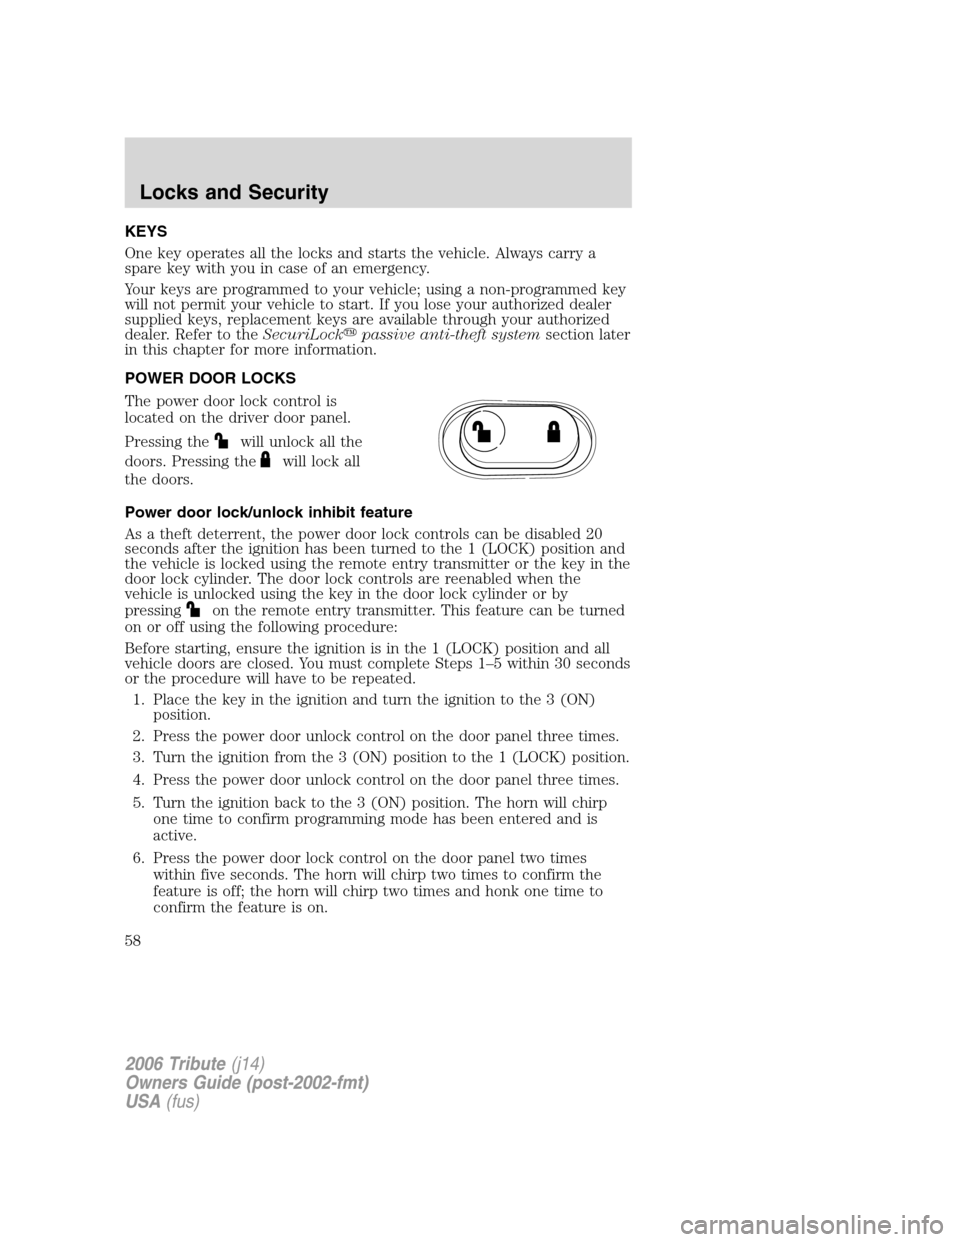 MAZDA MODEL TRIBUTE 2006  Owners Manual (in English) KEYS
One key operates all the locks and starts the vehicle. Always carry a
spare key with you in case of an emergency.
Your keys are programmed to your vehicle; using a non-programmed key
will not per